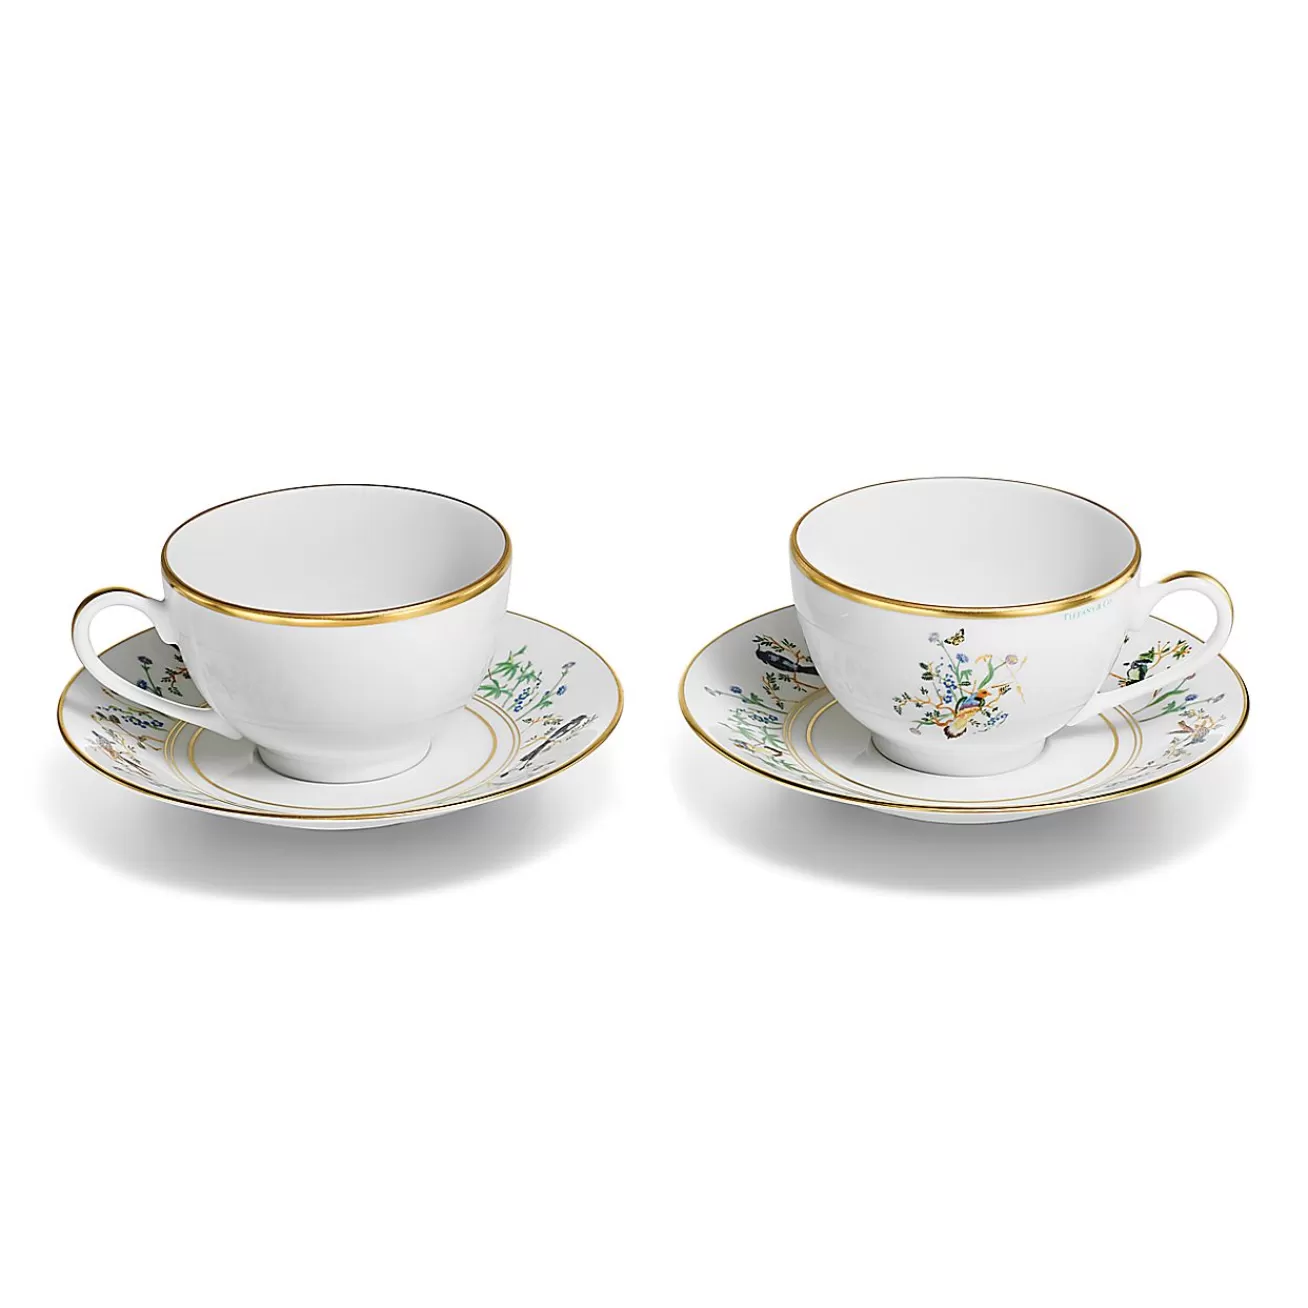 Tiffany & Co. Tiffany Jardin Teacup and Saucer in Porcelain, Set of Two | ^ The Home | Housewarming Gifts